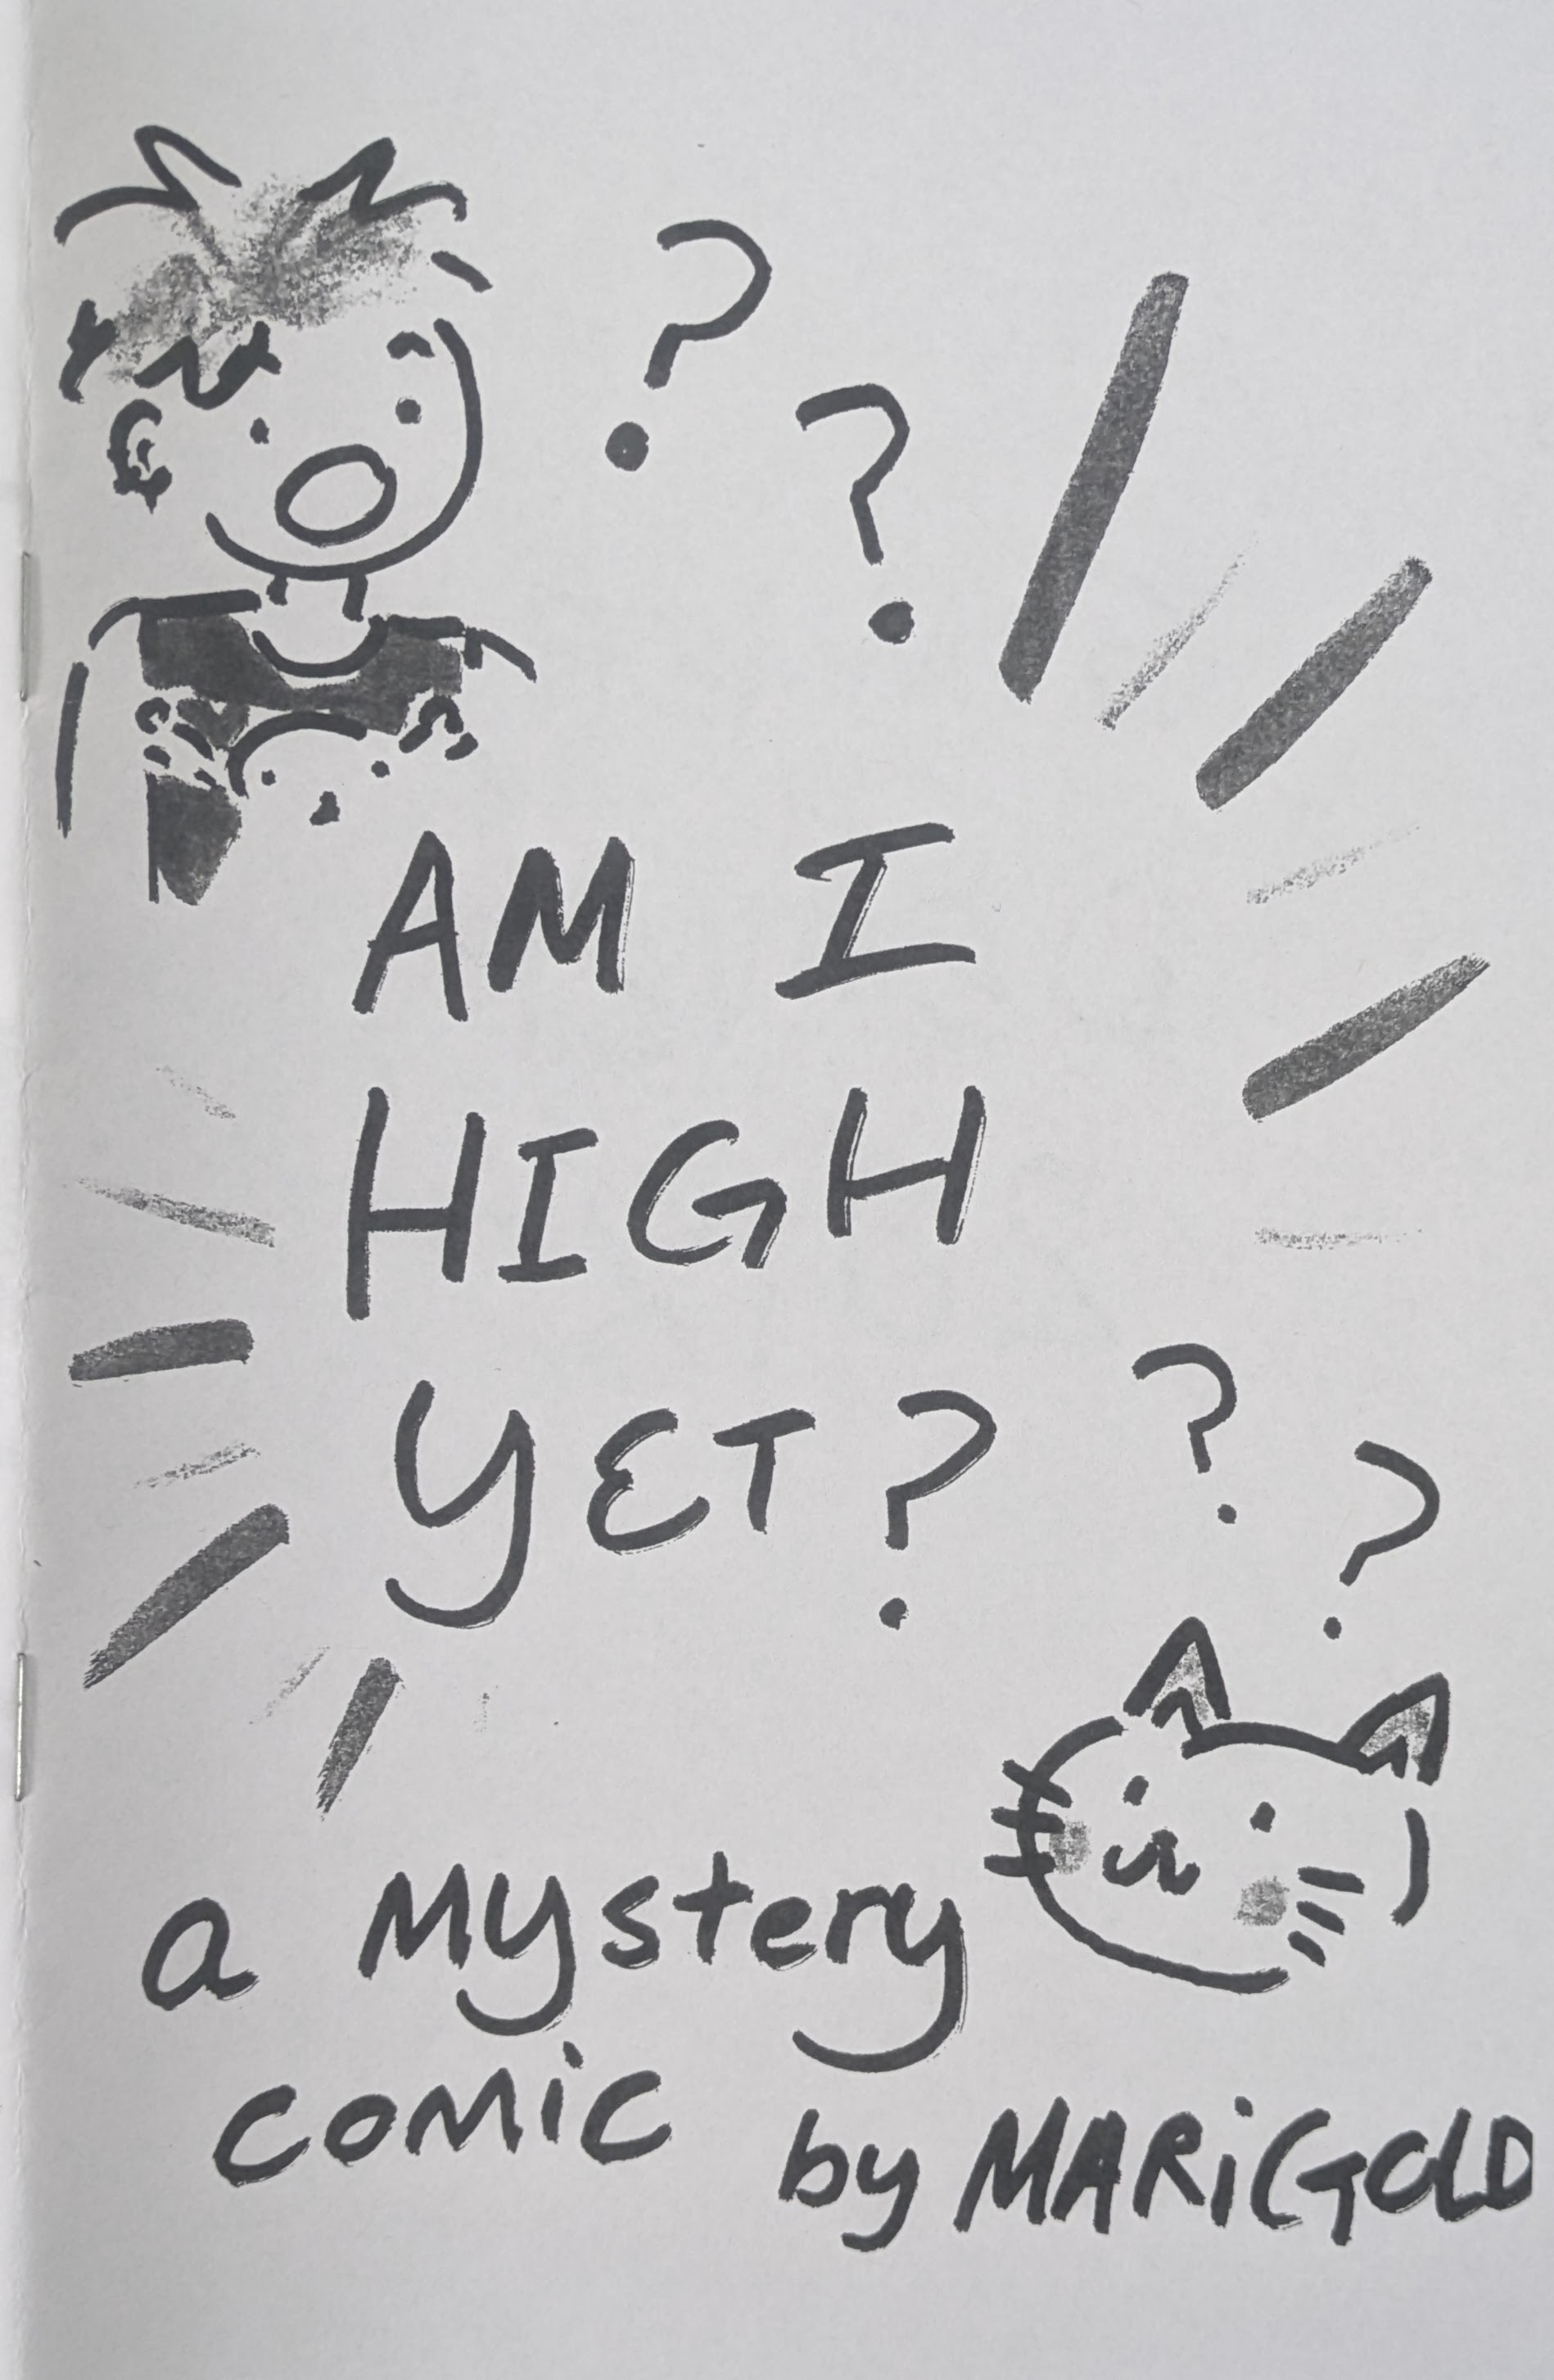 The cover of the zine “Am I High Yet?” An illustrated Mystery.